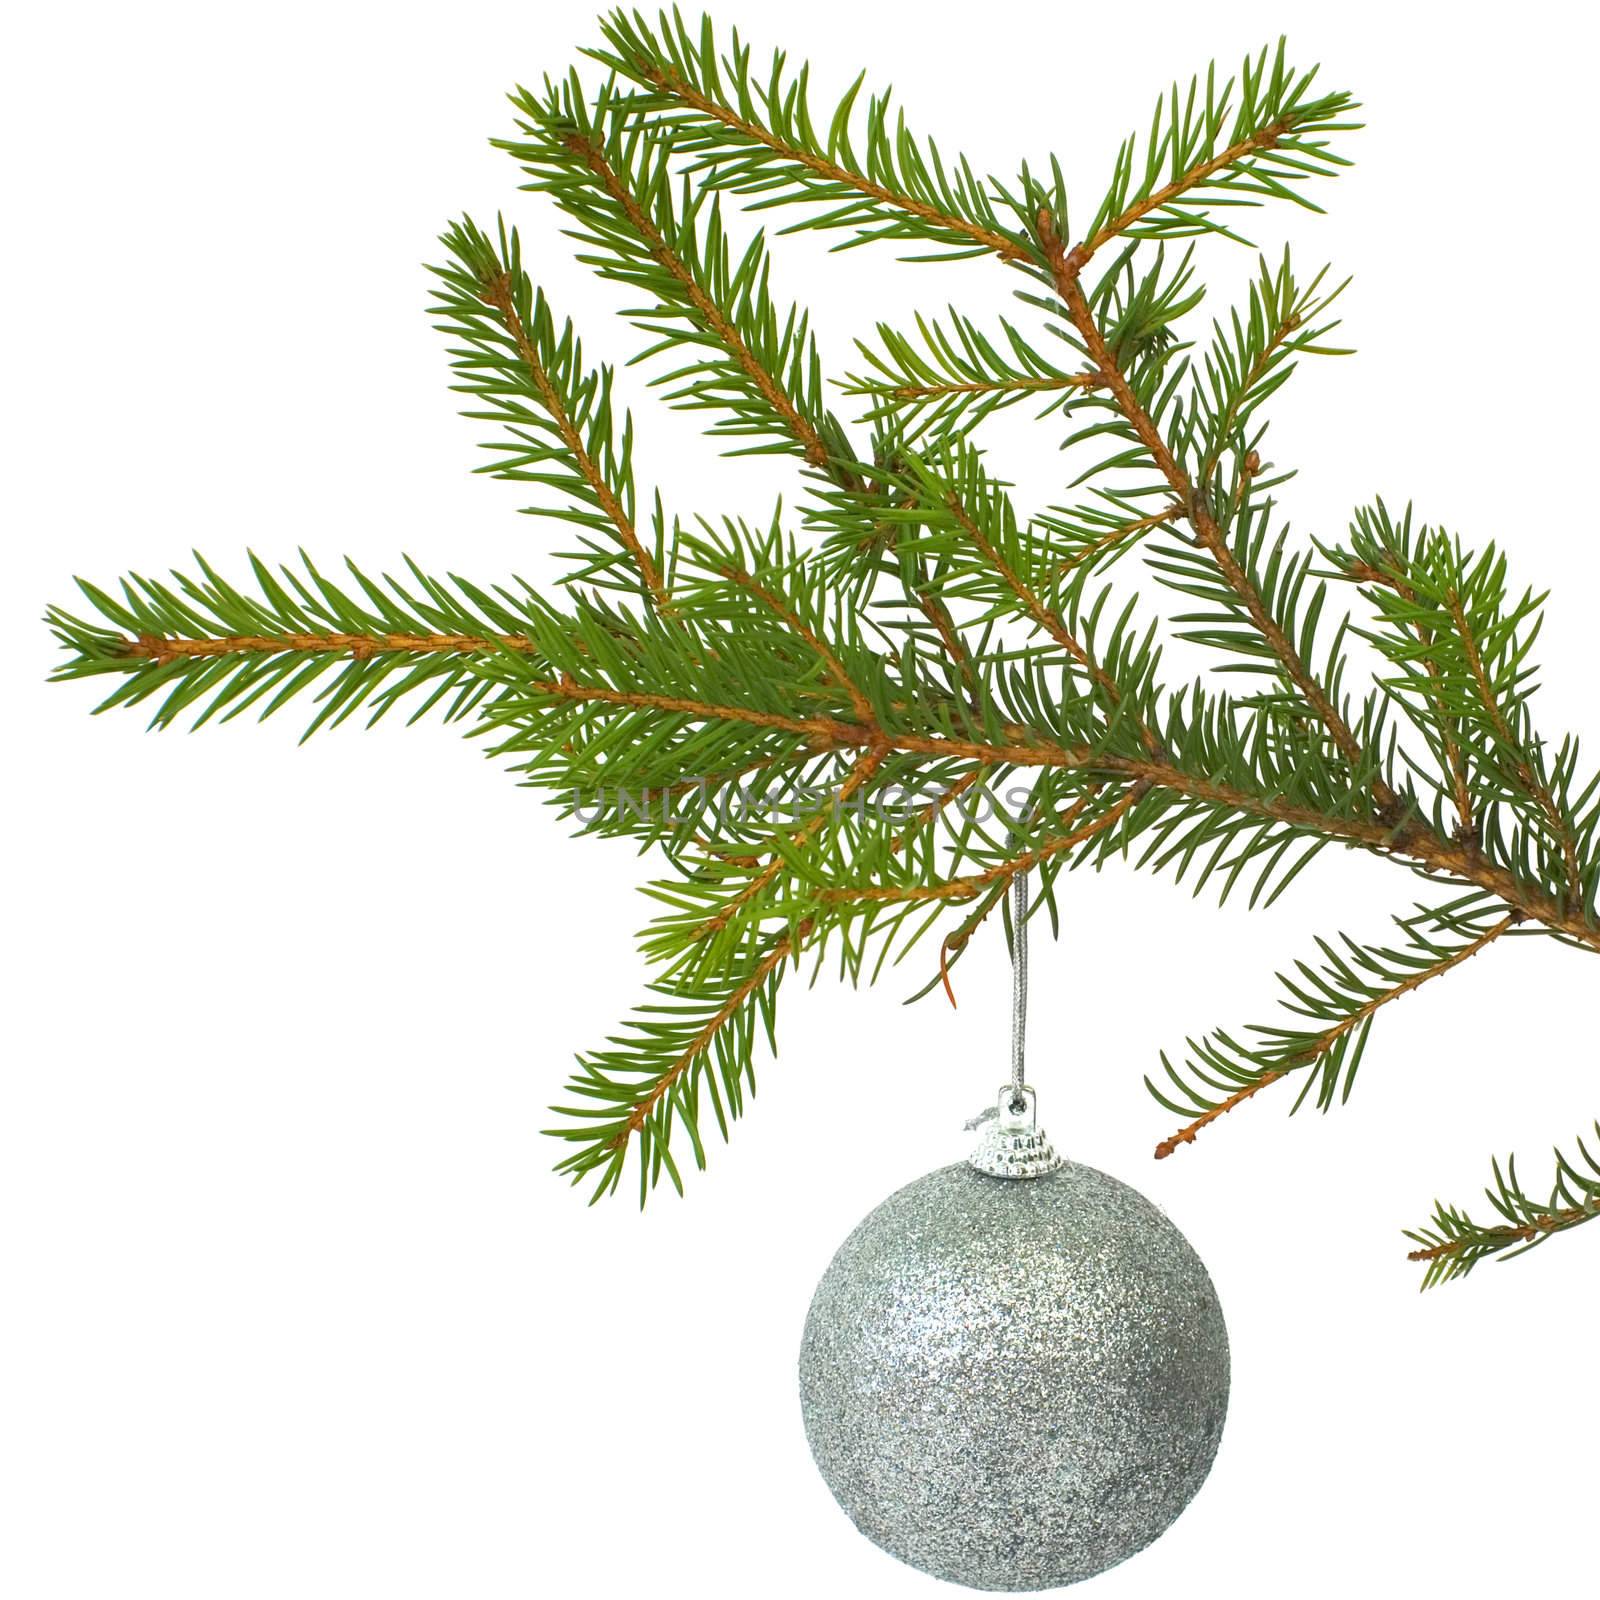 Silver New Year's ball on a fur-tree branch on white background